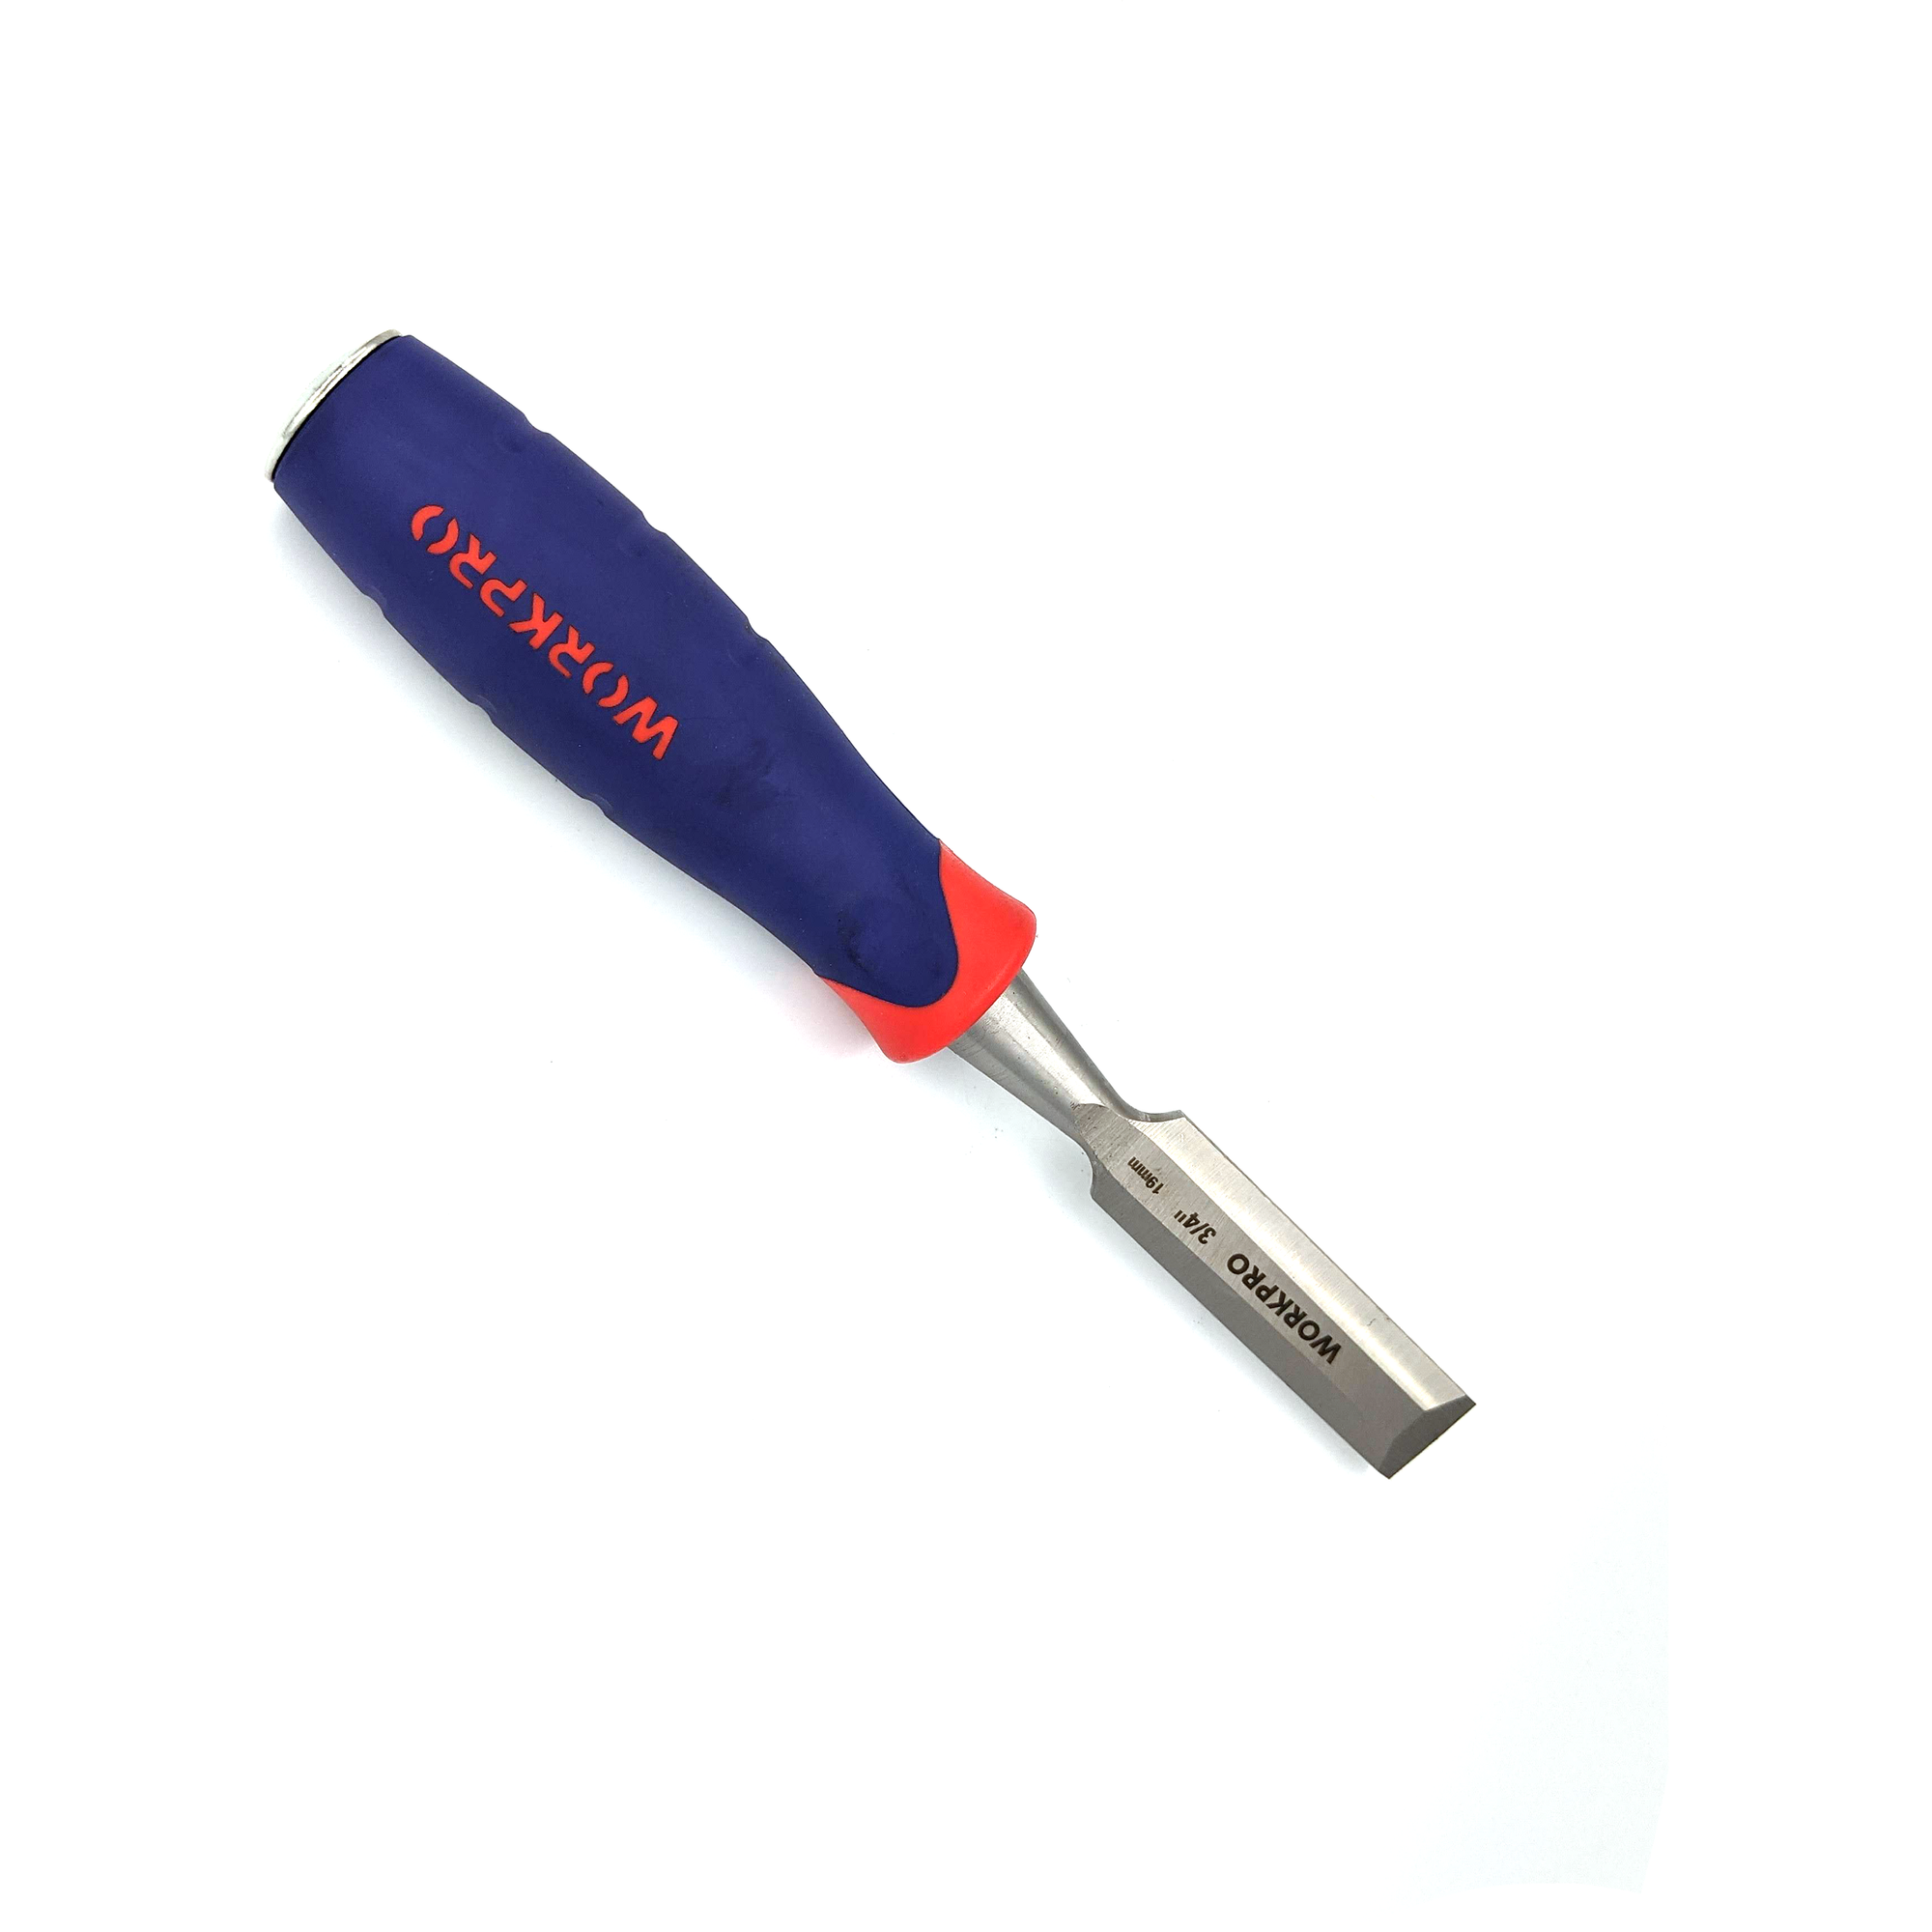 Workpro Wood Chisel 1Inch